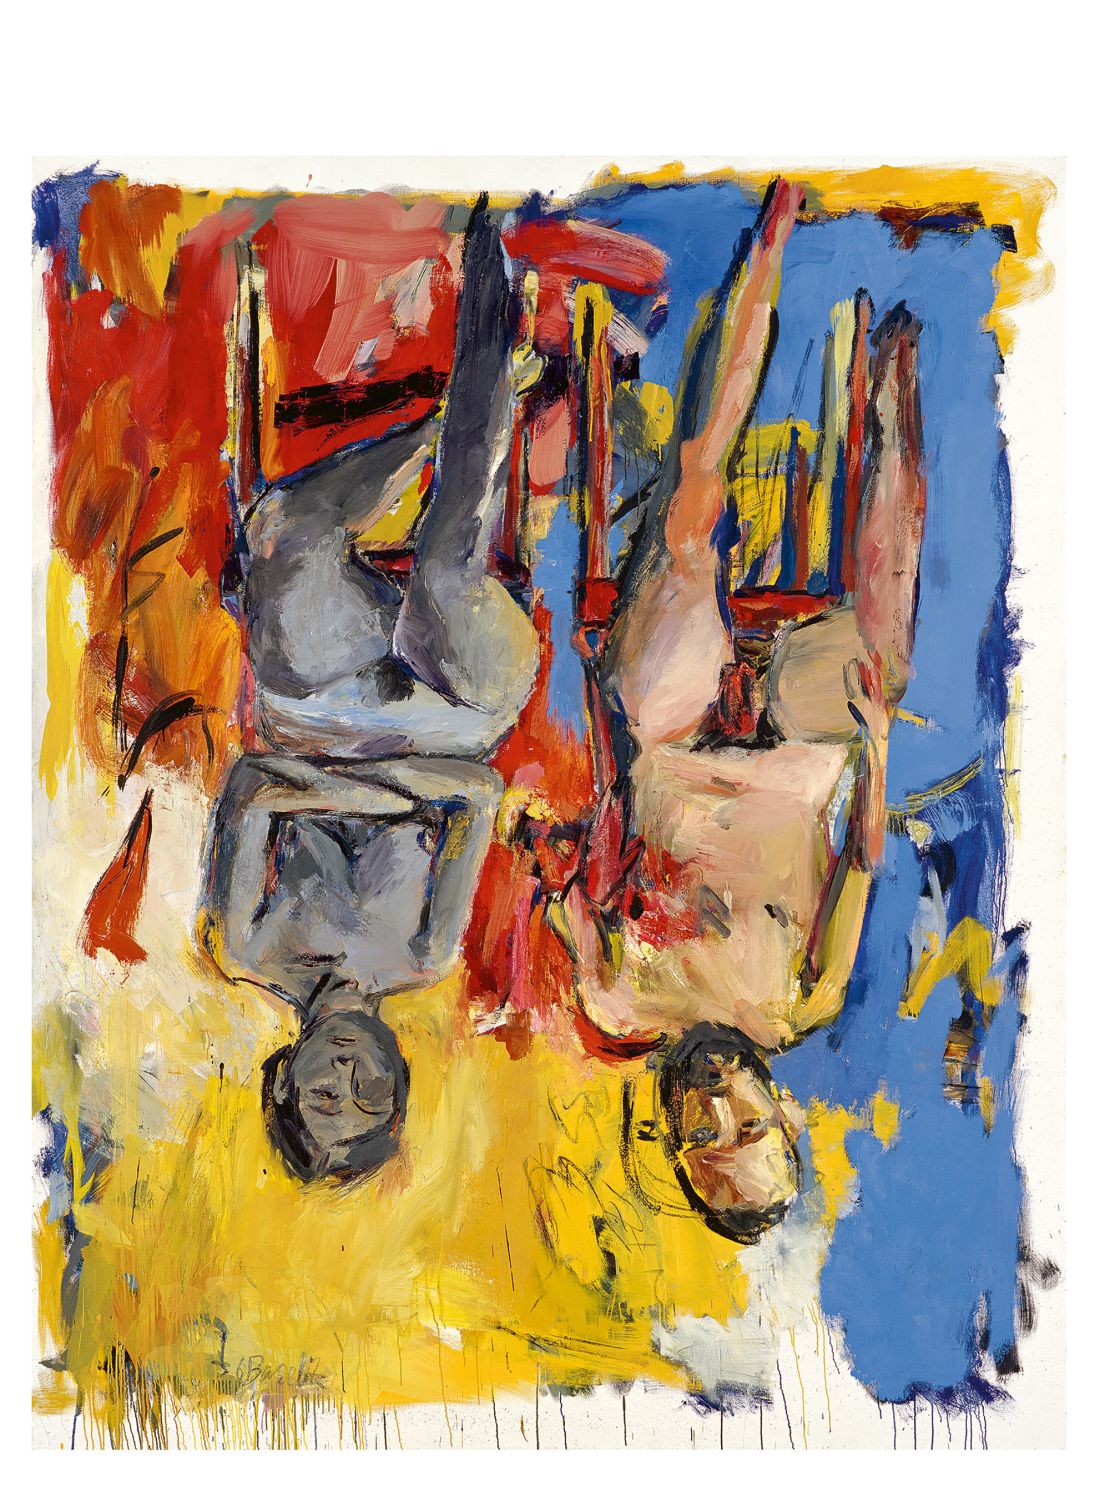 "Schlafzimmer (Bedroom)," (1975) by Georg Baselitz. Oil and charcoal on canvas.